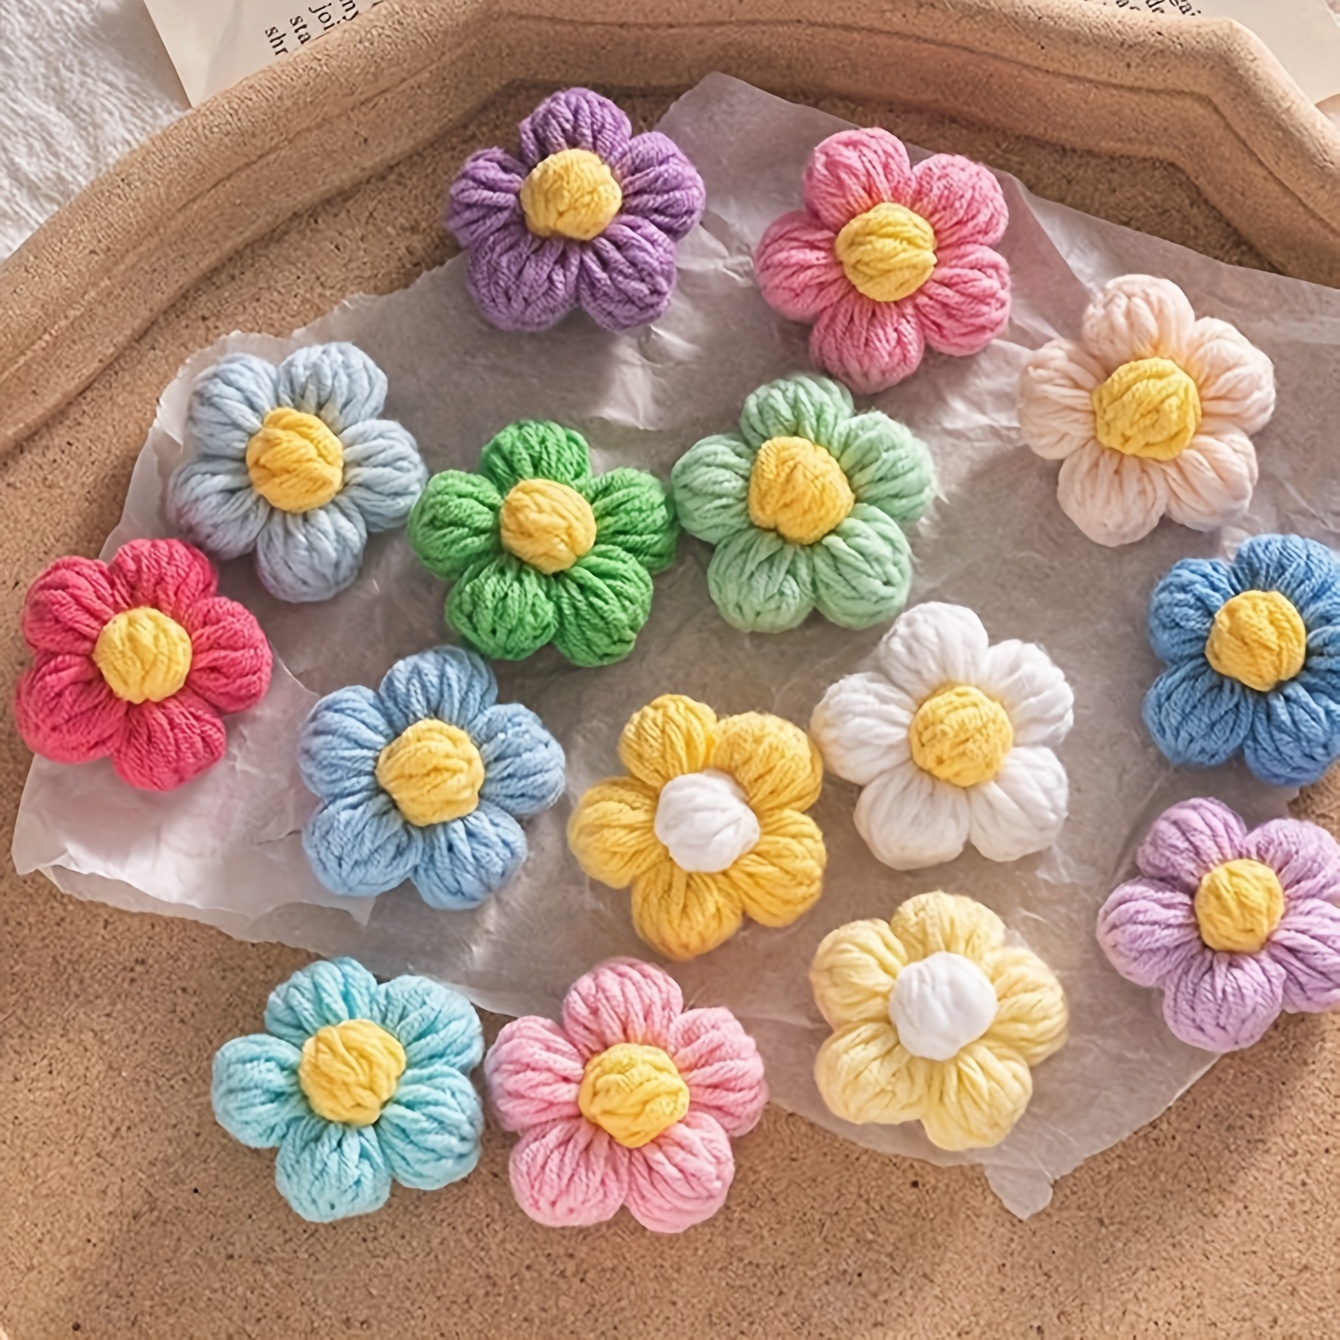 

10pcs Handmade Crochet Colorful Woolen Flowers Puff Small Flowers Holiday Accessories Clothing Accessories